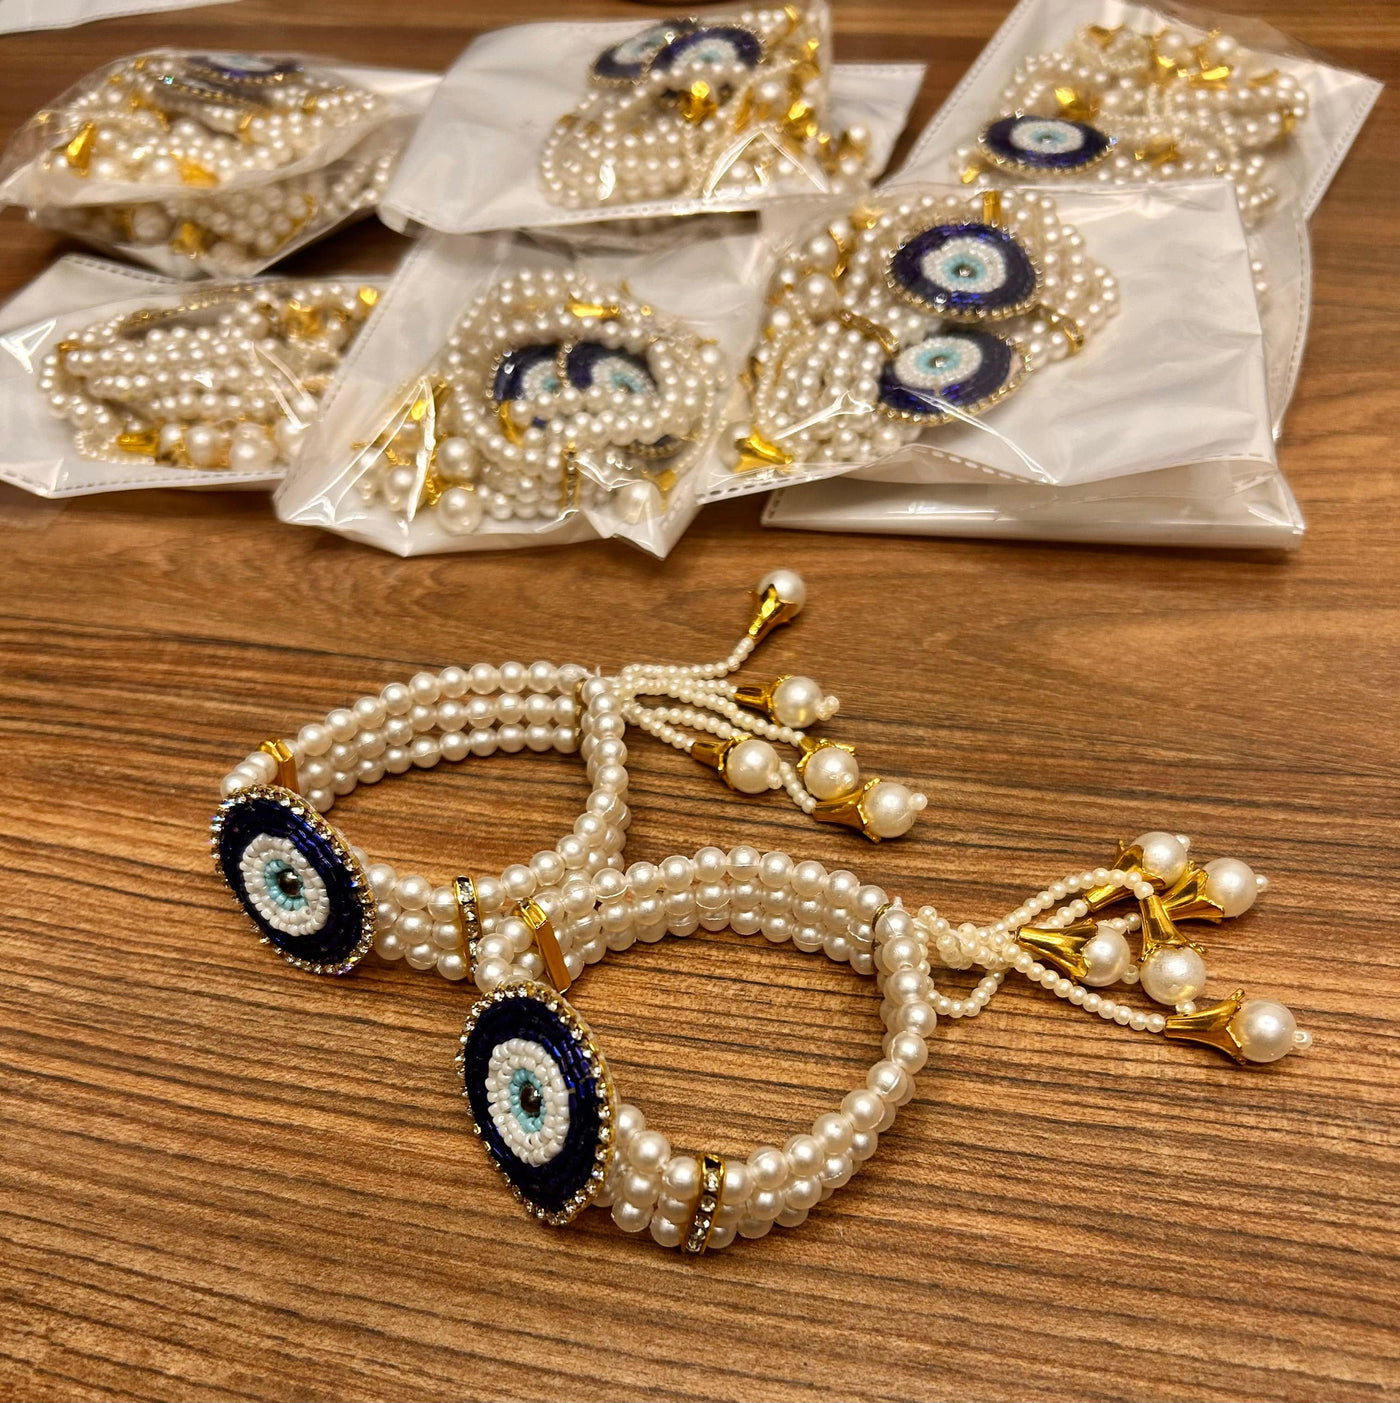 80 Rs pair on buying minimum 50 pairs | Whatsapp at 8619550223 evil eye bracelets LAMANSH Evil Eye 🧿 Elastic Bracelets for giveaways 🎁 to bridesmaids and guests